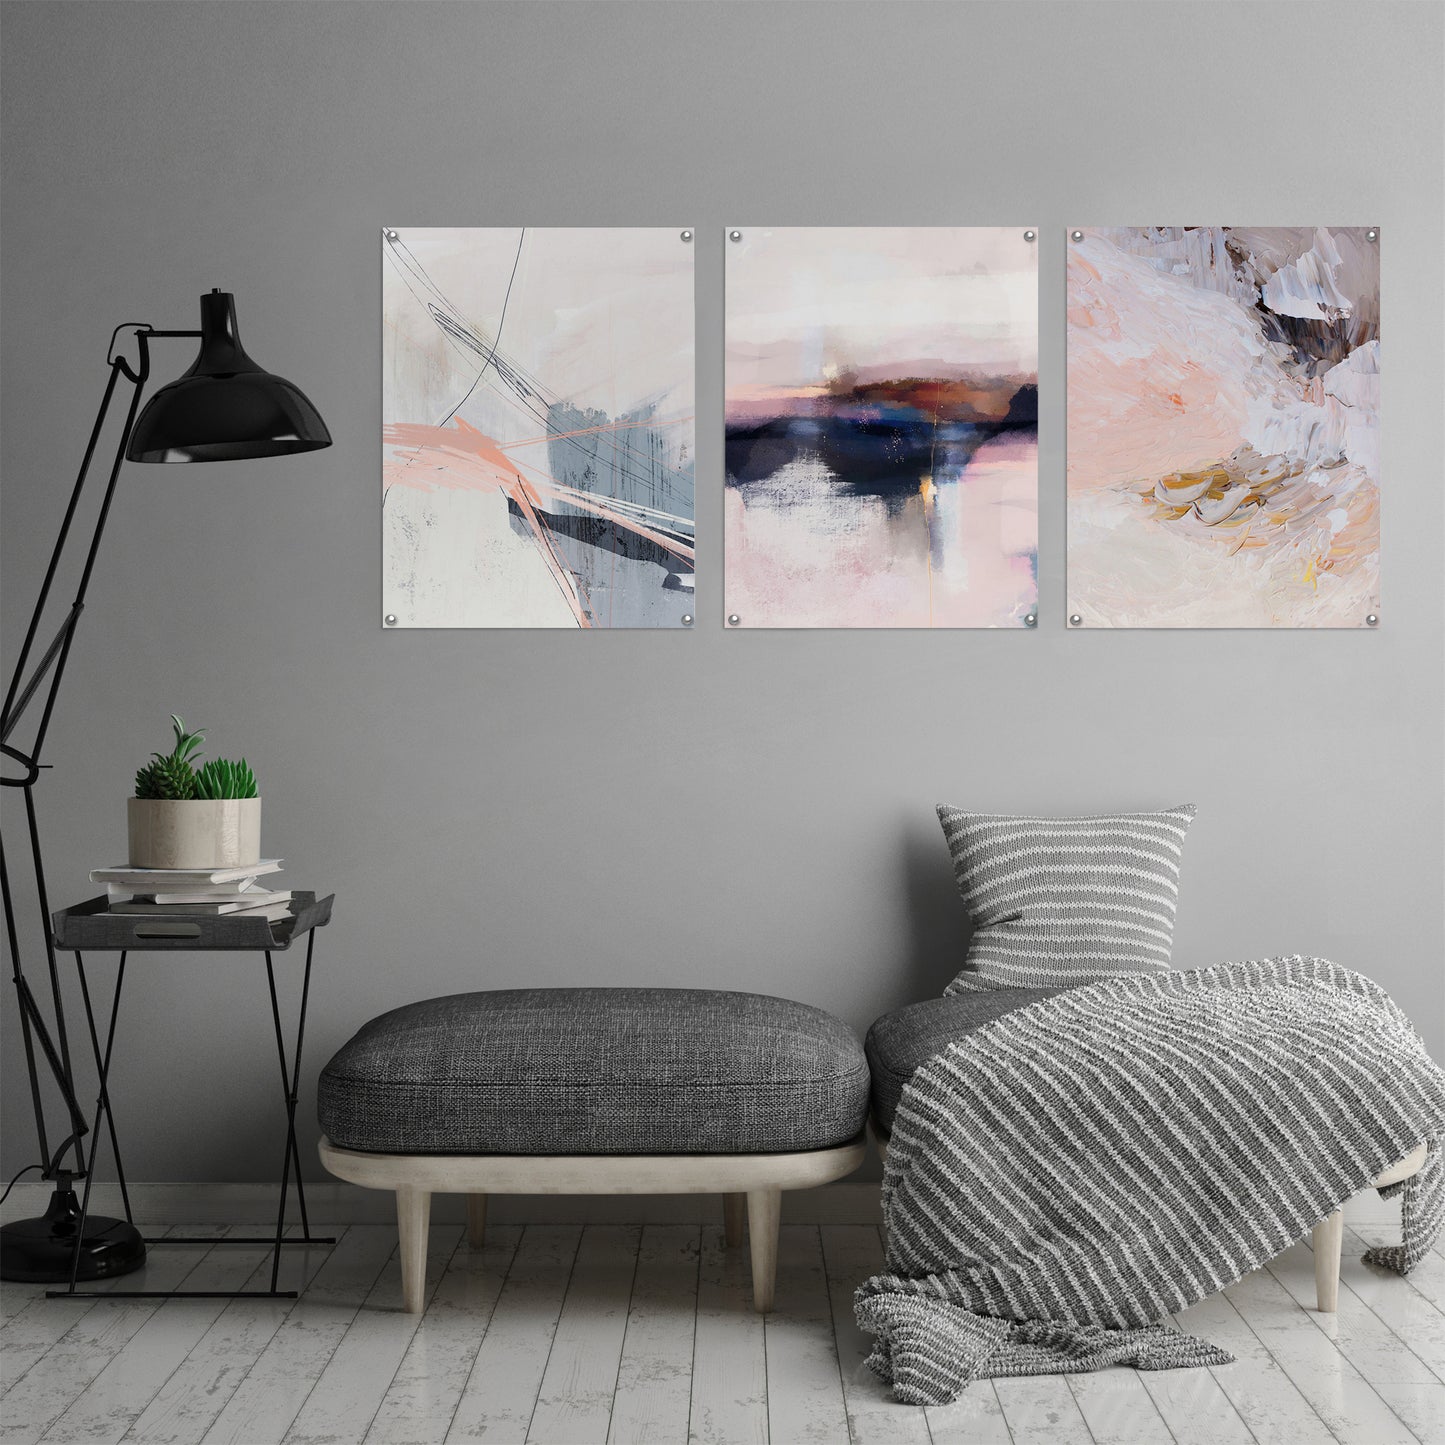 (Set of 3) Triptych Wall Art Smoky Blush by Louise Robinson - Poster Print